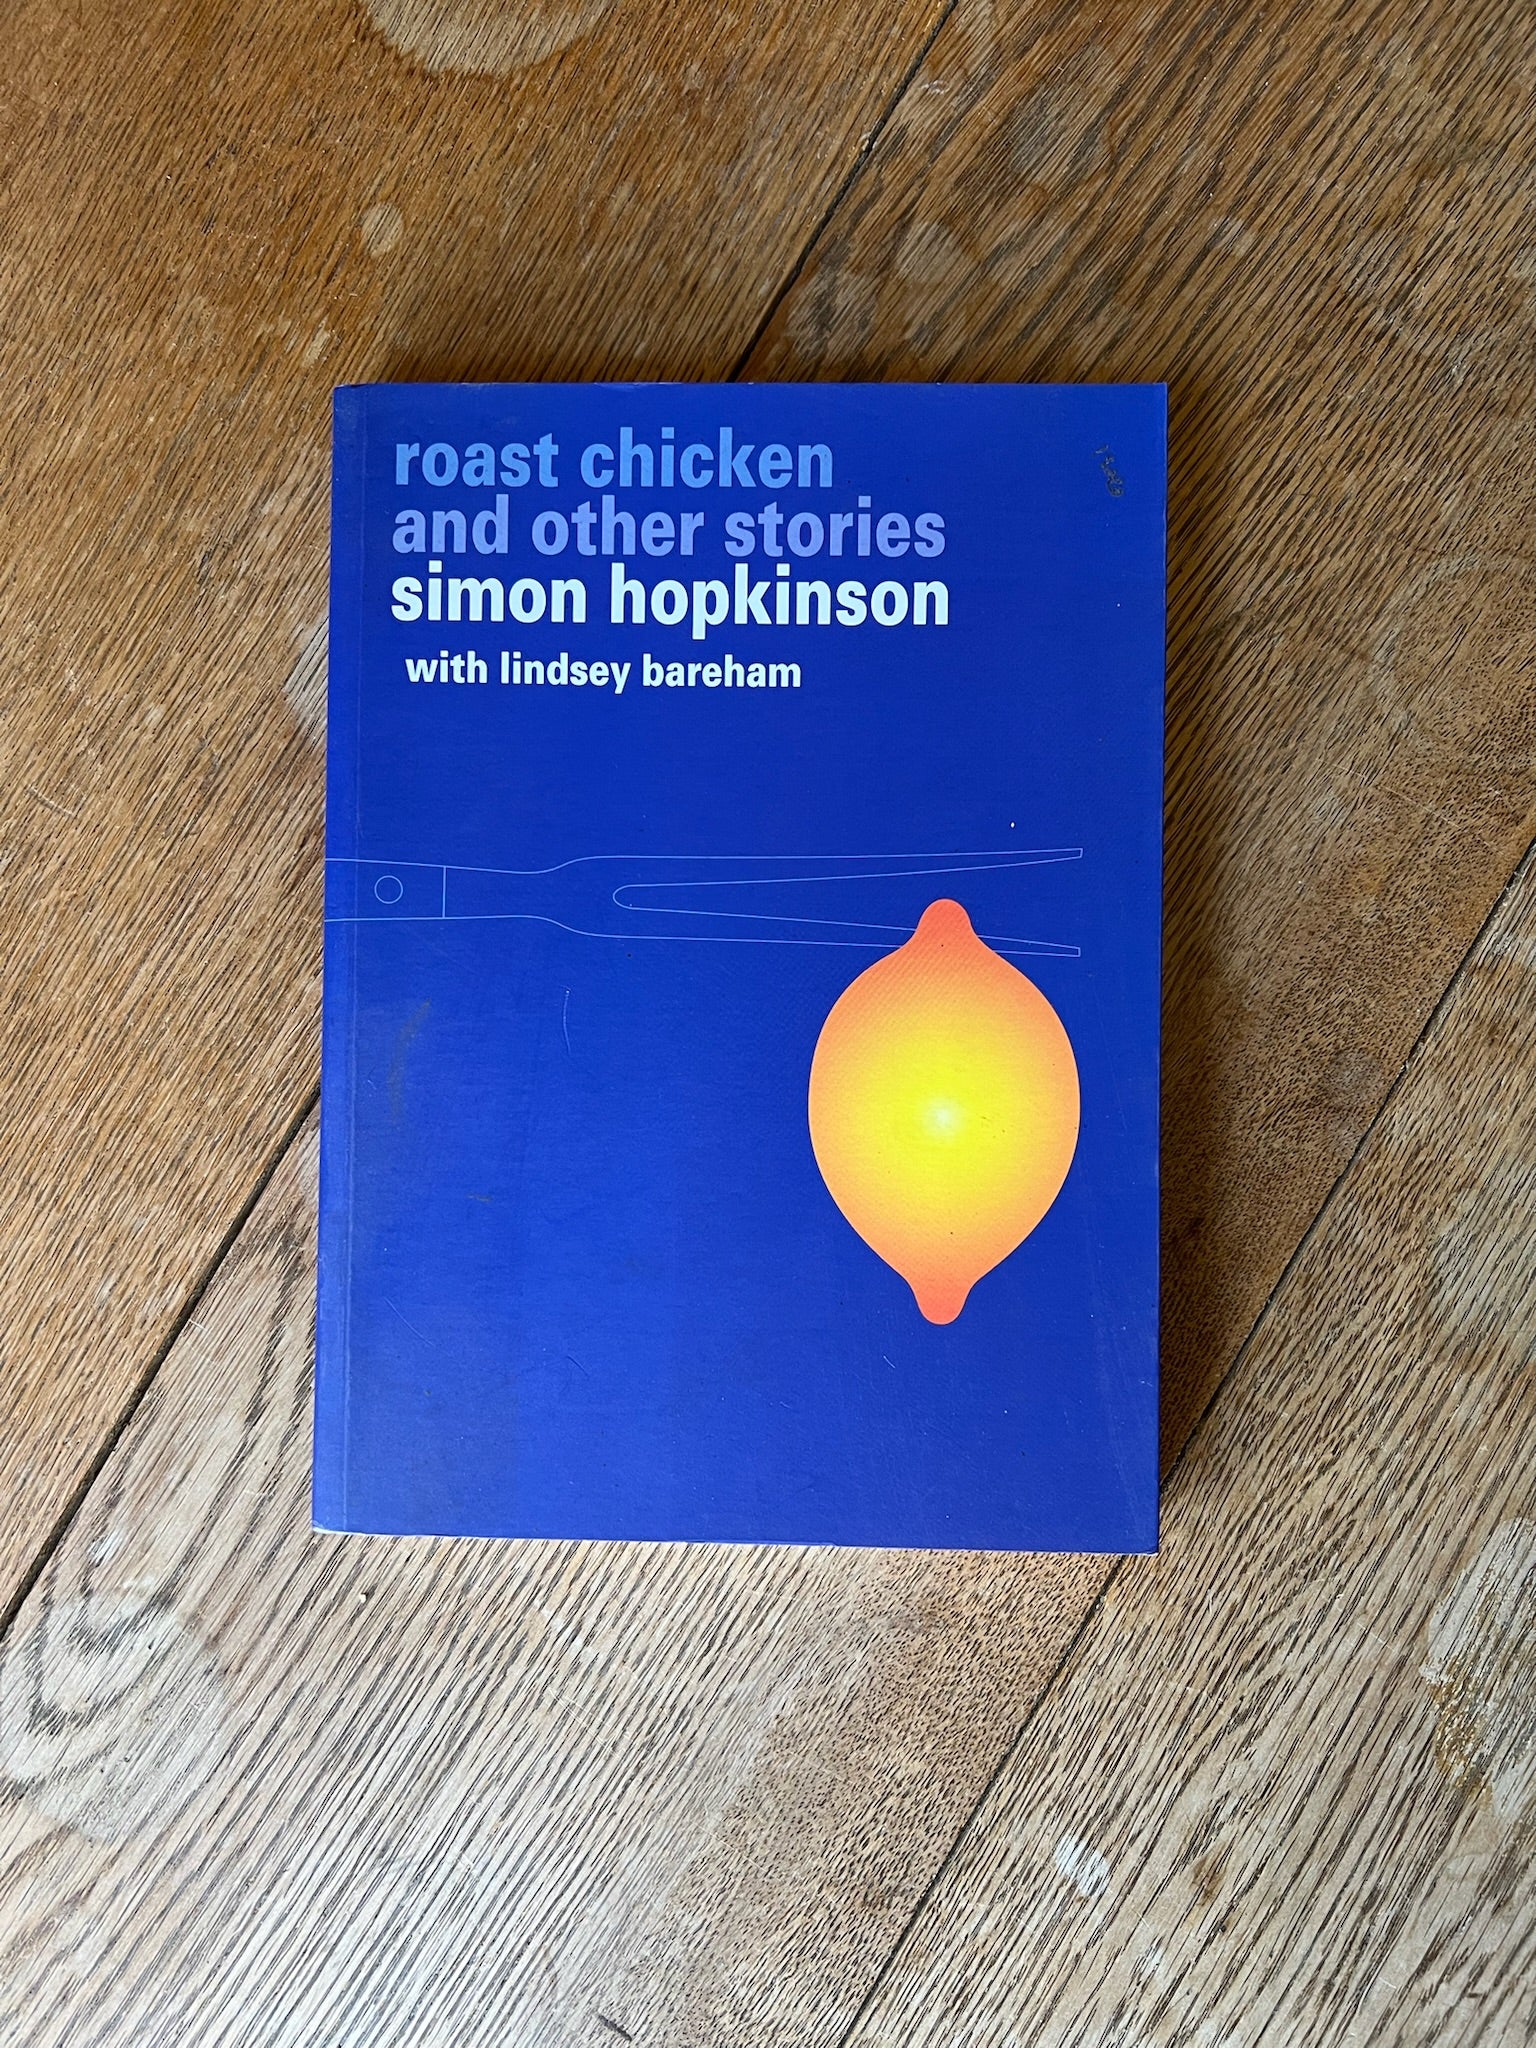 “ROAST CHICKEN AND OTHER STORIES’ Simon Hopkinson